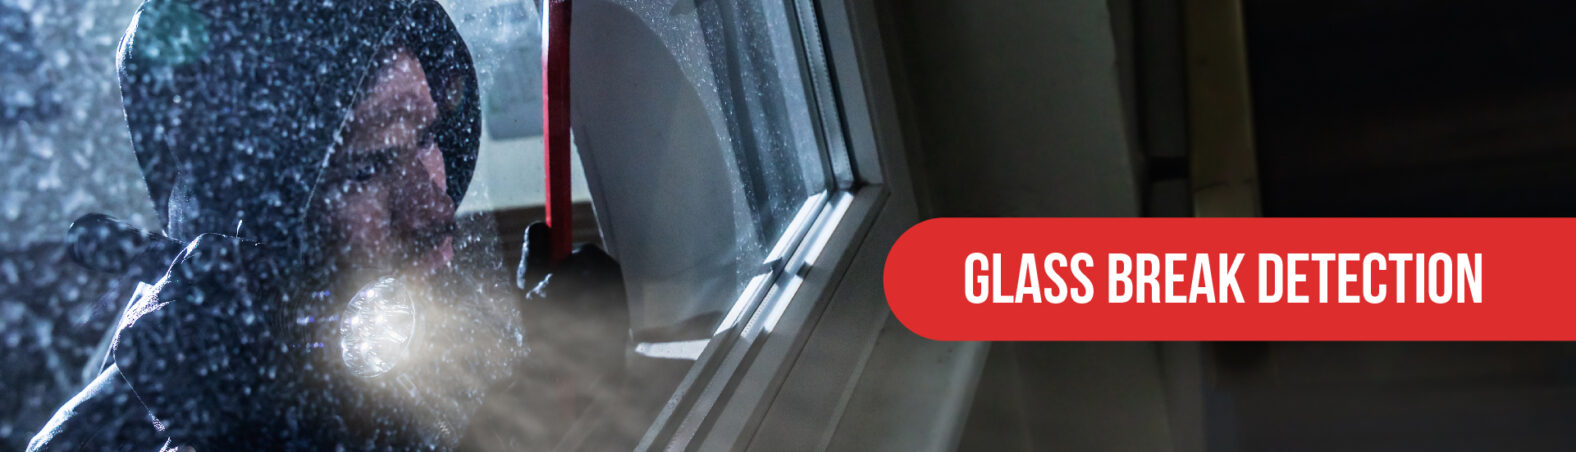 Glass break sensors are designed to alert you when a window is broken so you know if someone is breaking into your home